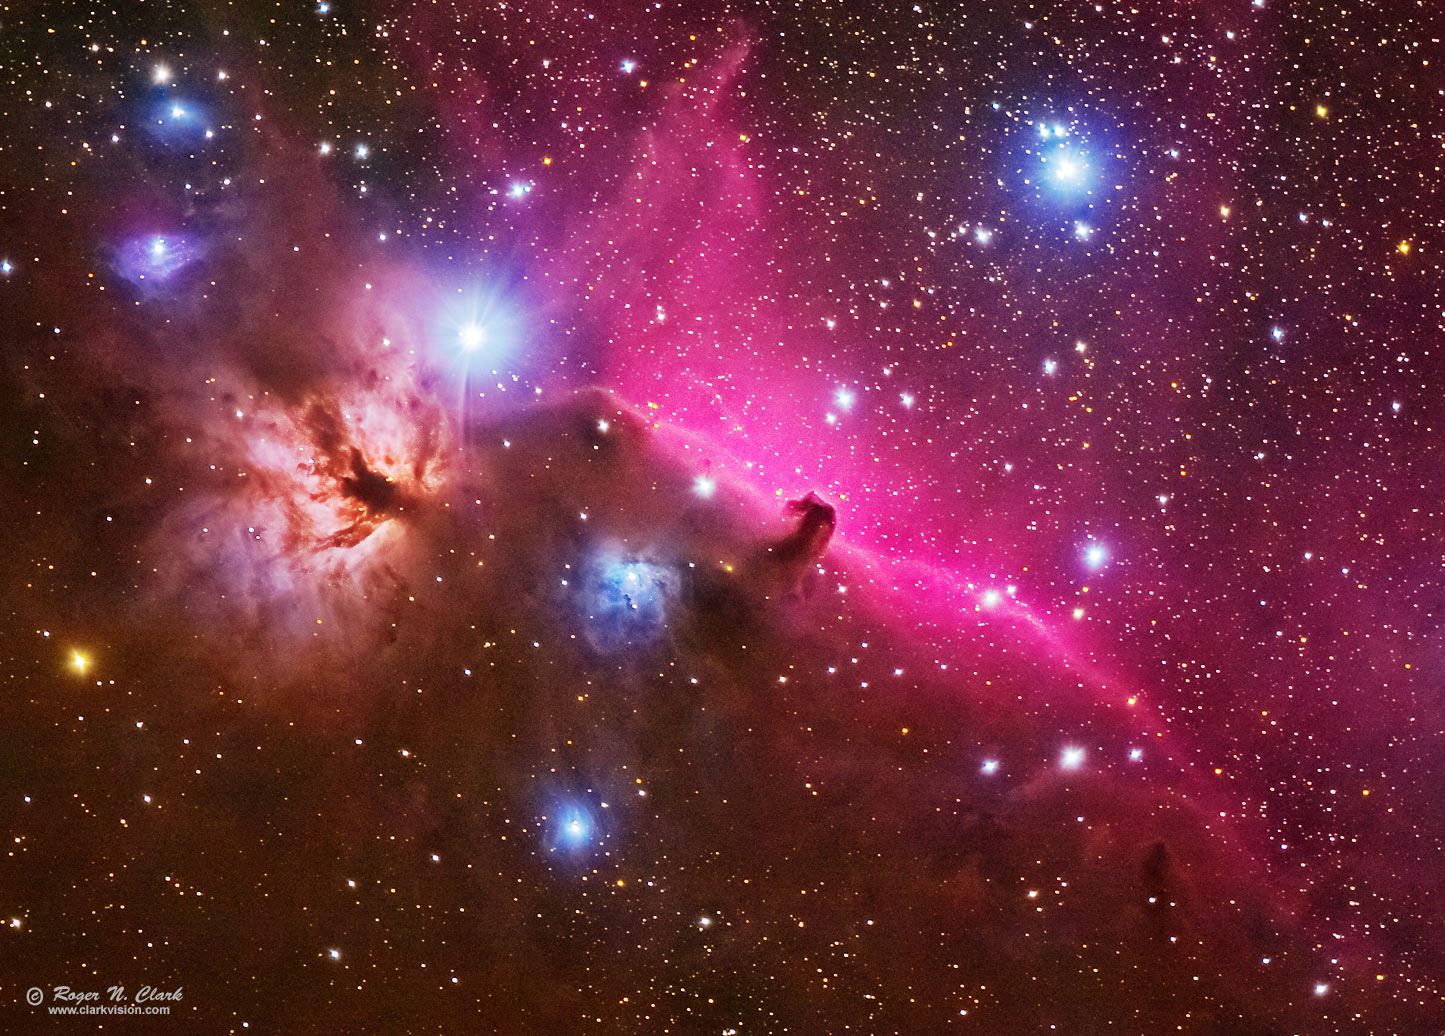 image horsehead.rclark.c11.21.2014.0J6A1680-1750-t2.i-c1-1445s.jpg is Copyrighted by Roger N. Clark, www.clarkvision.com